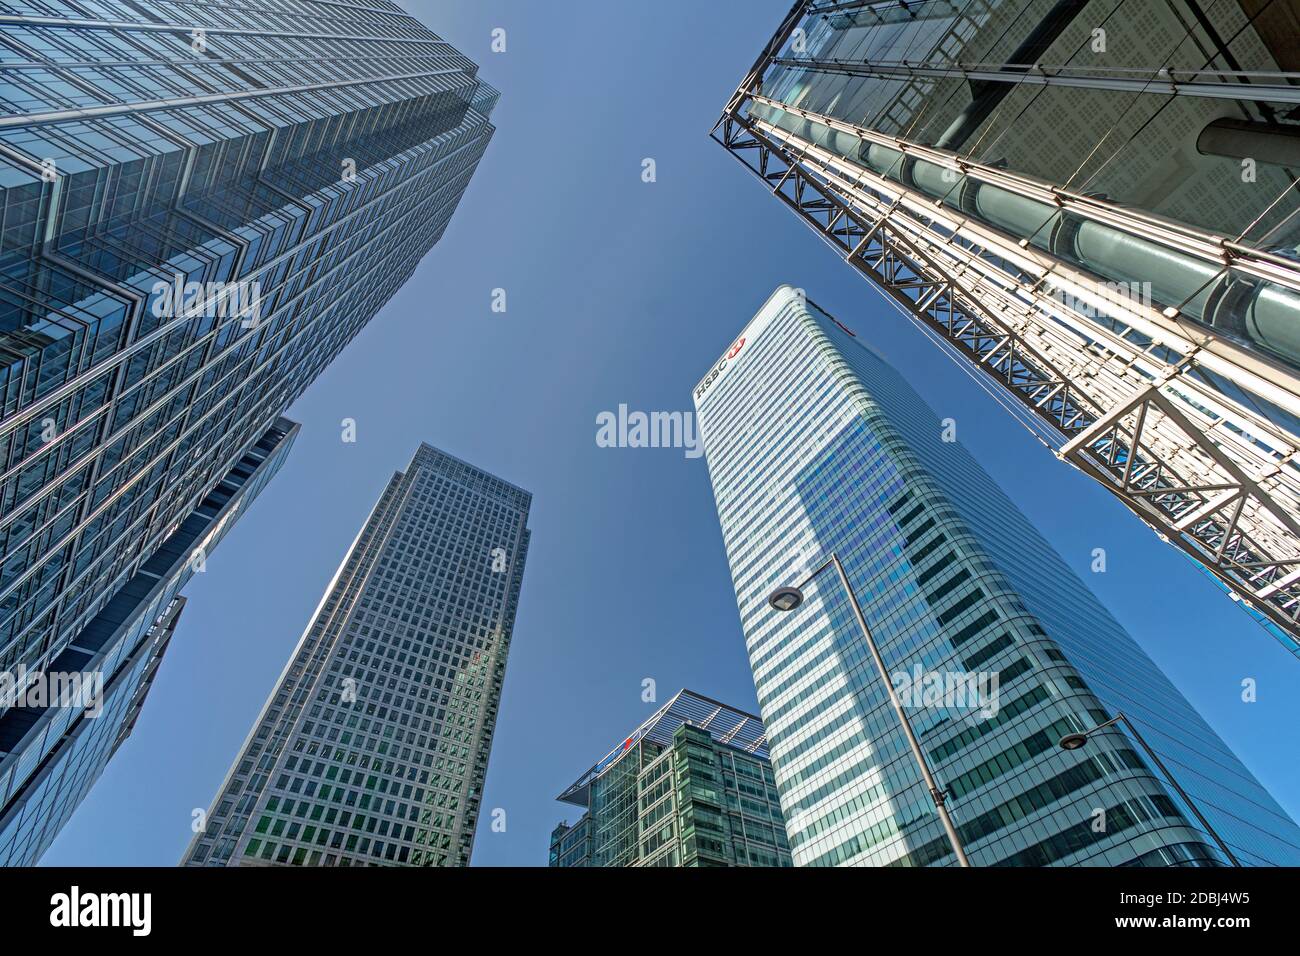 Citibank, 1 Canada Square, HSBC towers and Canada Place Shopping Centre, Docklands, London, England, United Kingdom, Europe Stock Photo